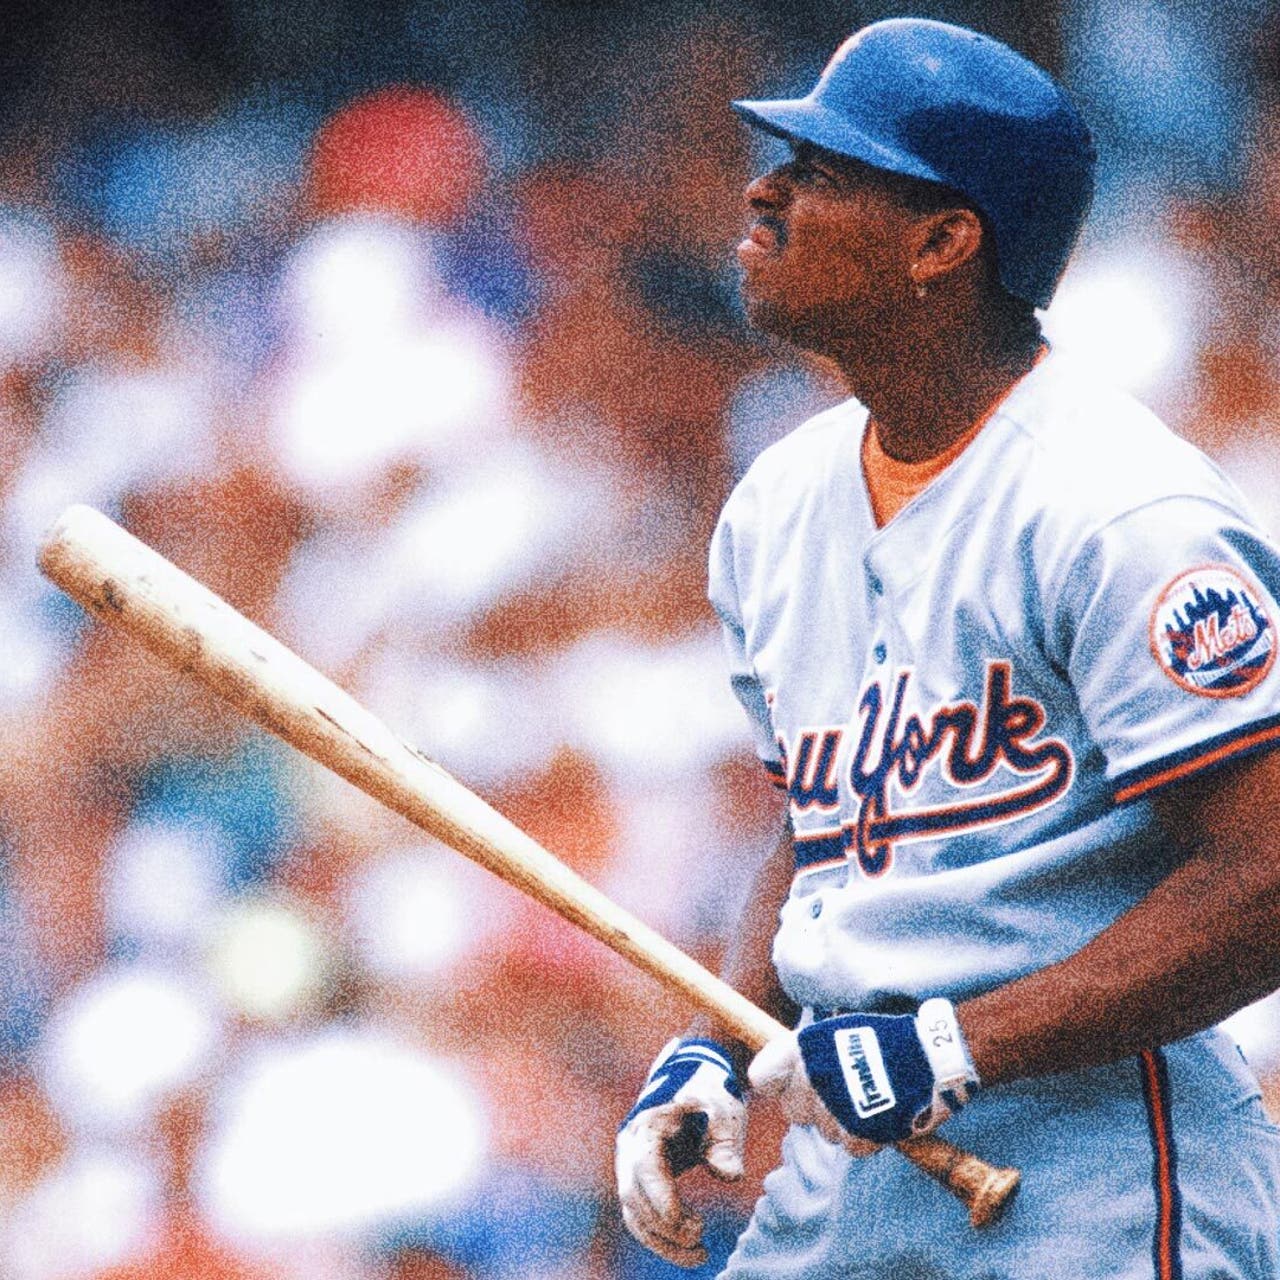 What is Bobby Bonilla Day? Explaining the New York Mets' ongoing